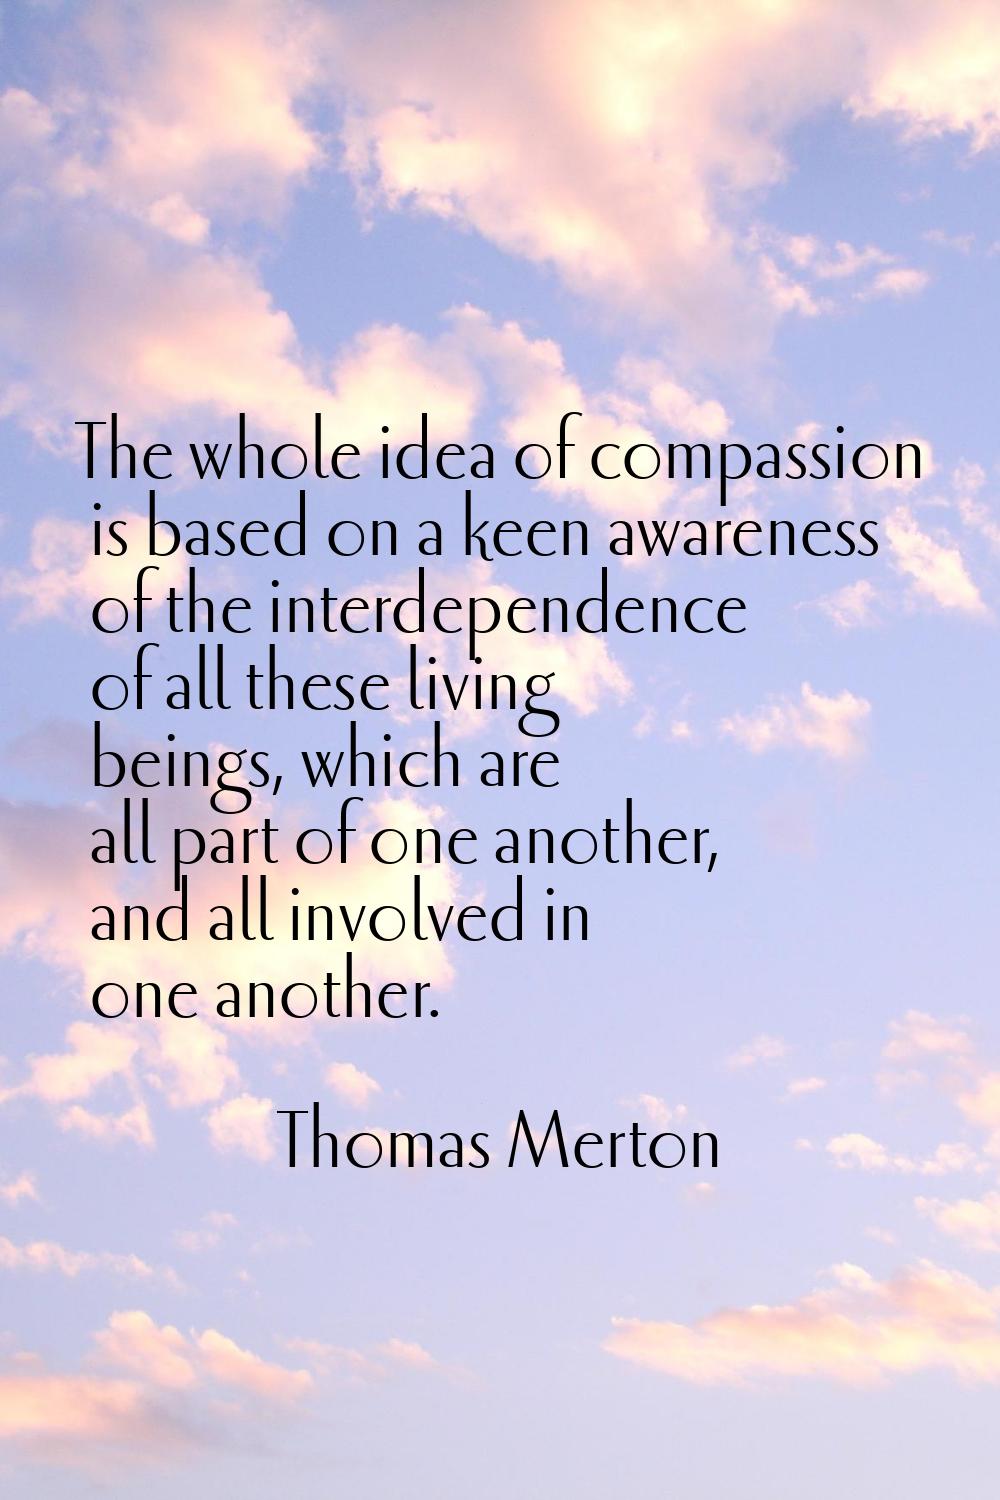 The whole idea of compassion is based on a keen awareness of the interdependence of all these livin